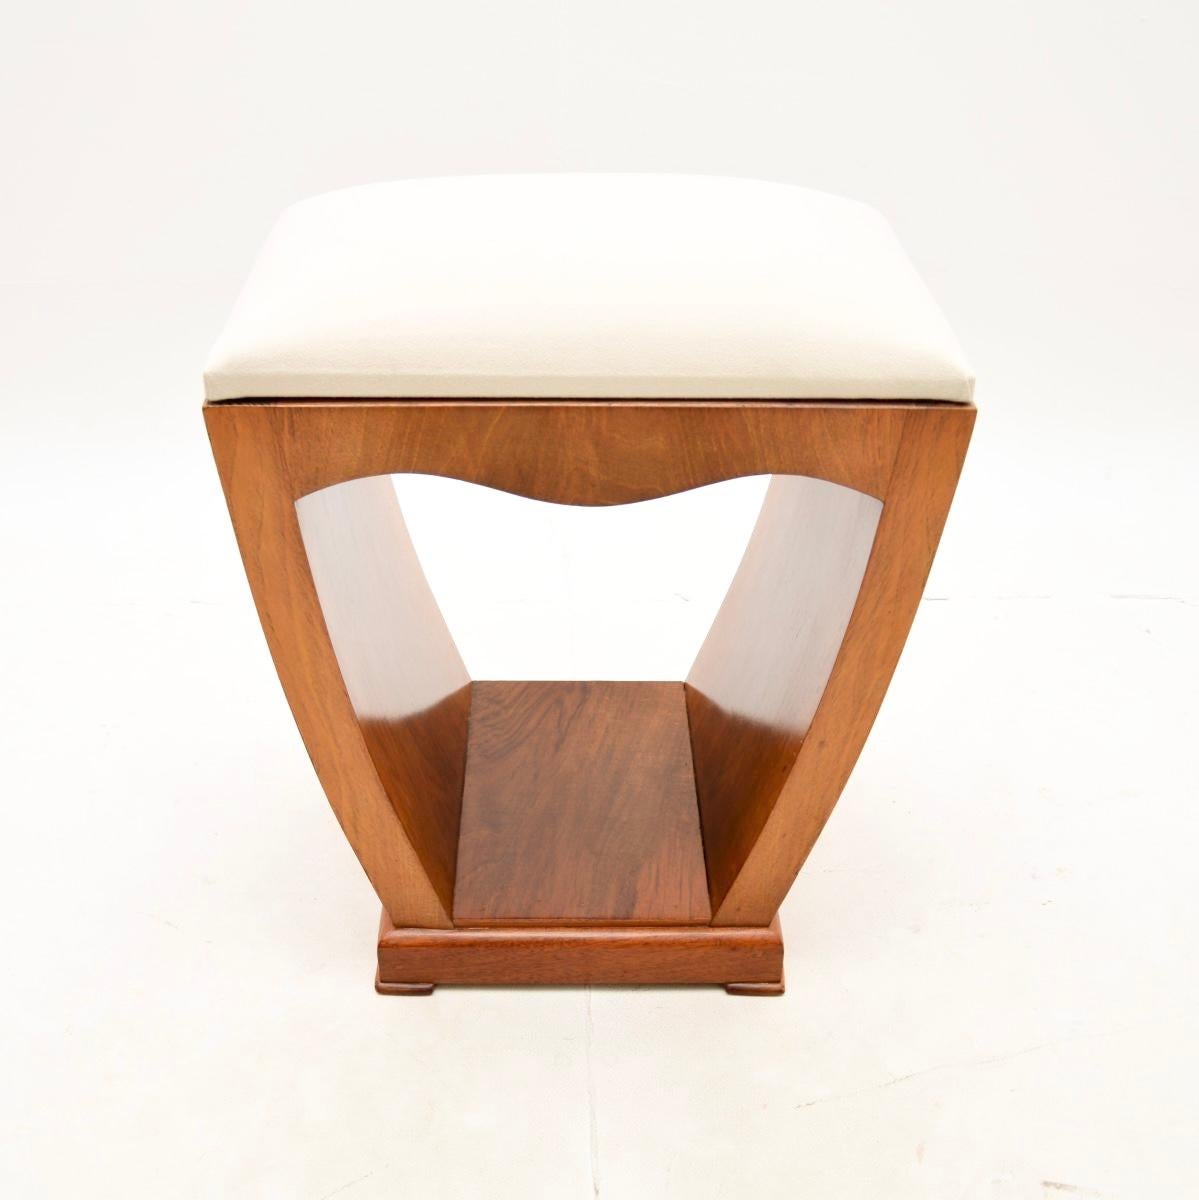 A beautifully designed and very well made Art Deco walnut stool. This was made in England, it dates from the 1920-30’s.

It is typically Art Deco in style, the walnut frame has beautiful curves and tapers nicely towards the base. The walnut grain